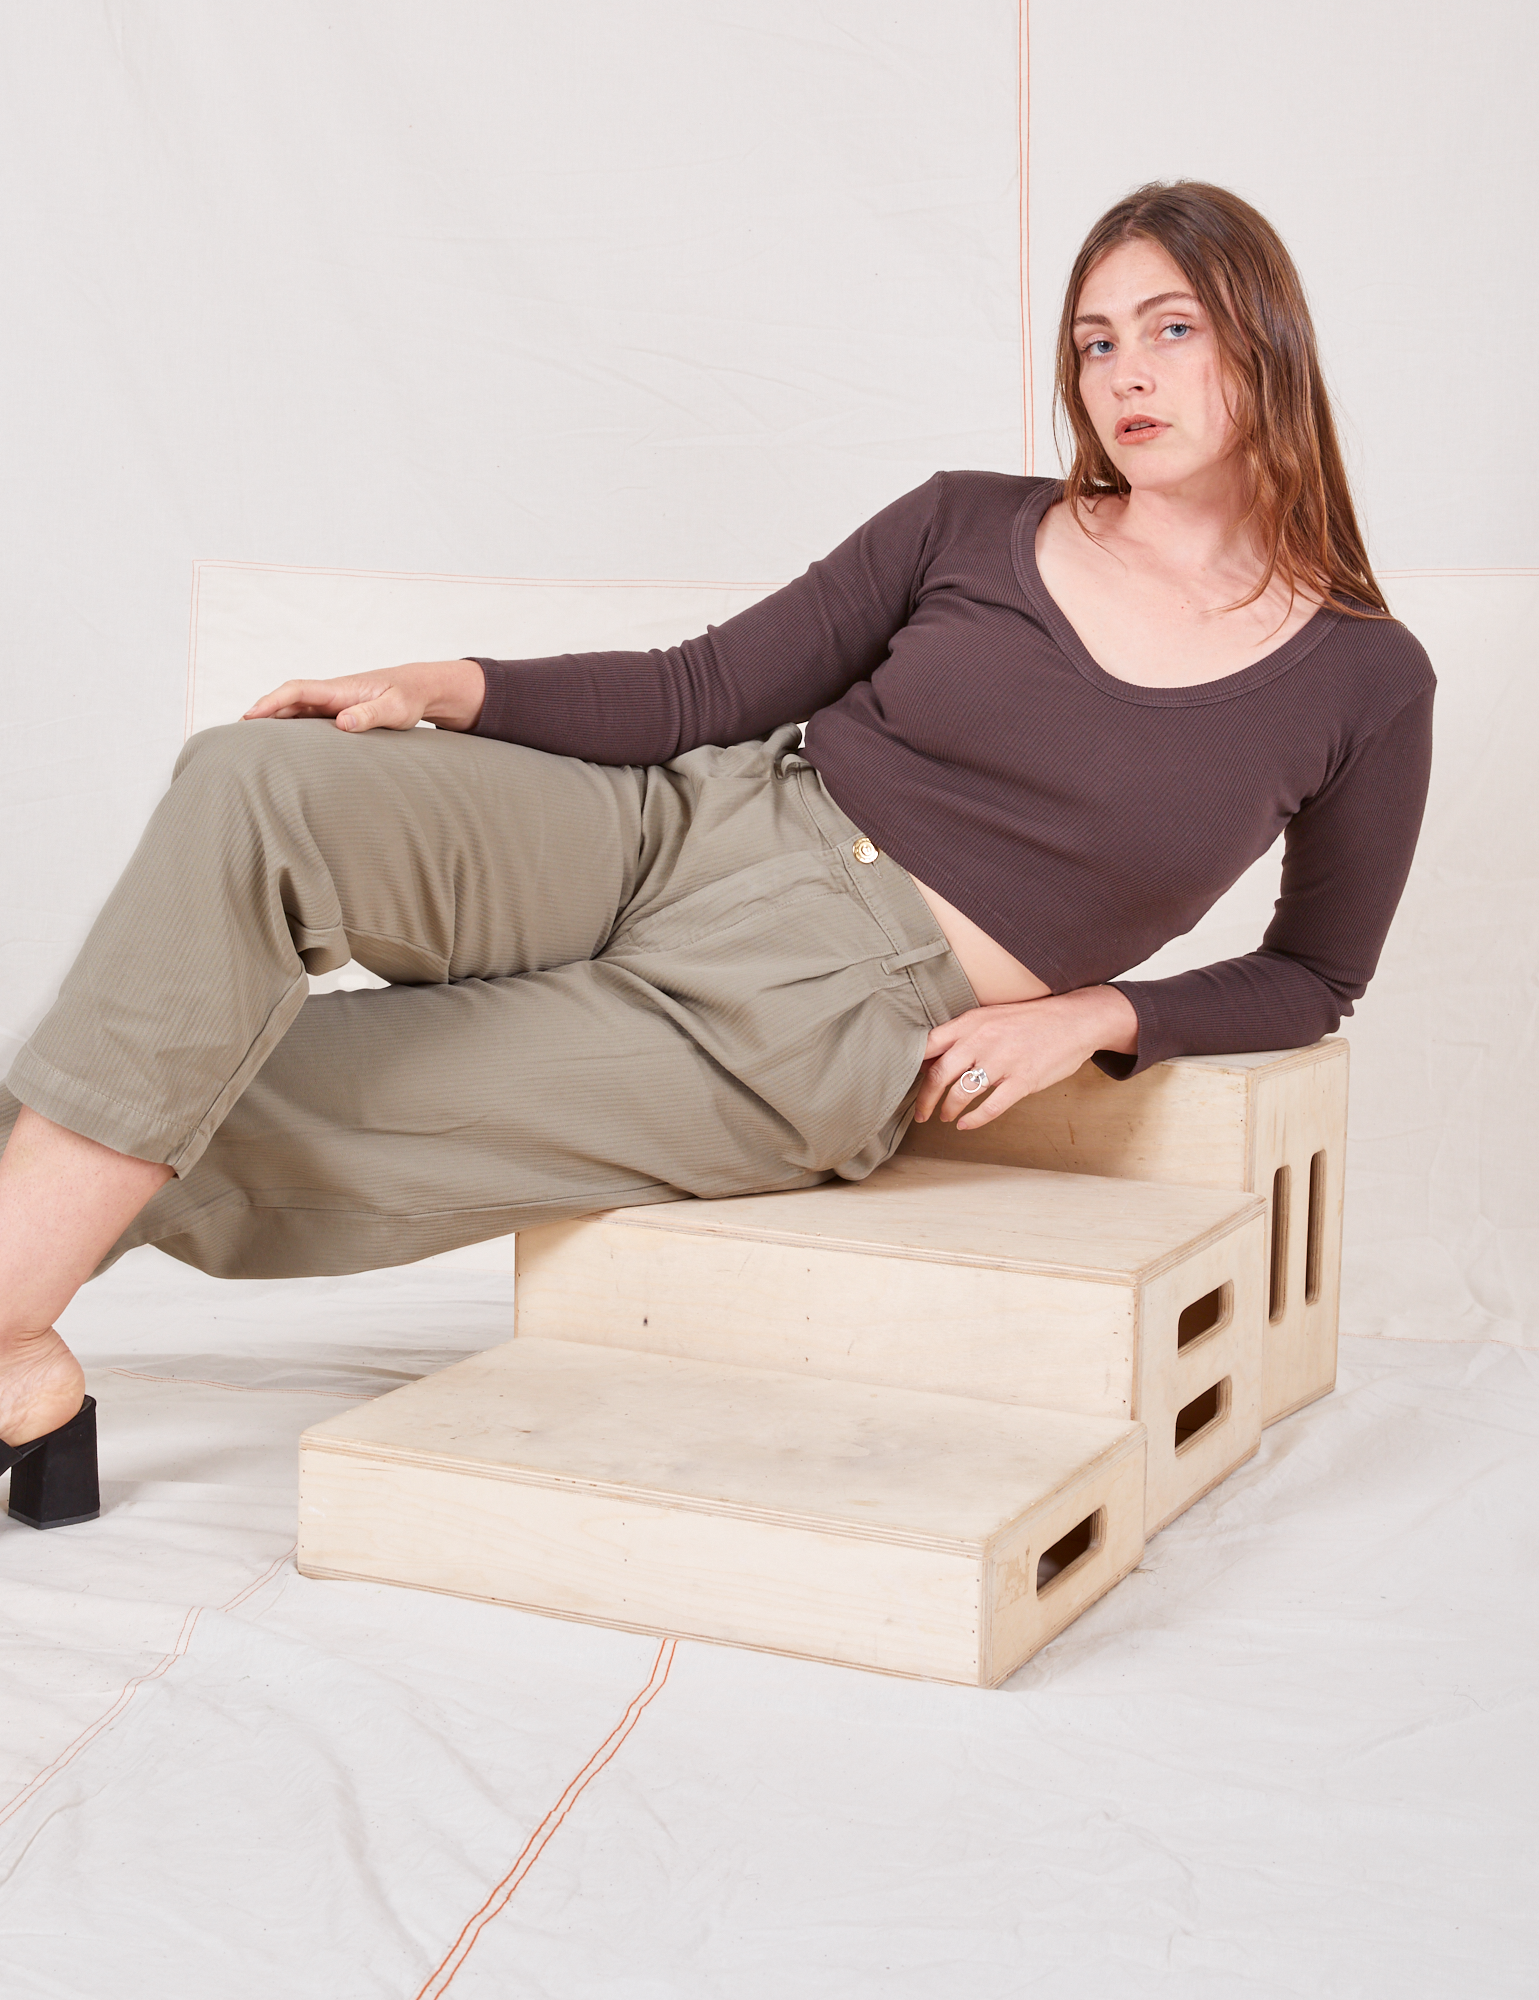 Allison is wearing Heritage Trousers in Khaki Grey and espresso brown Long Sleeve V-Neck Tee